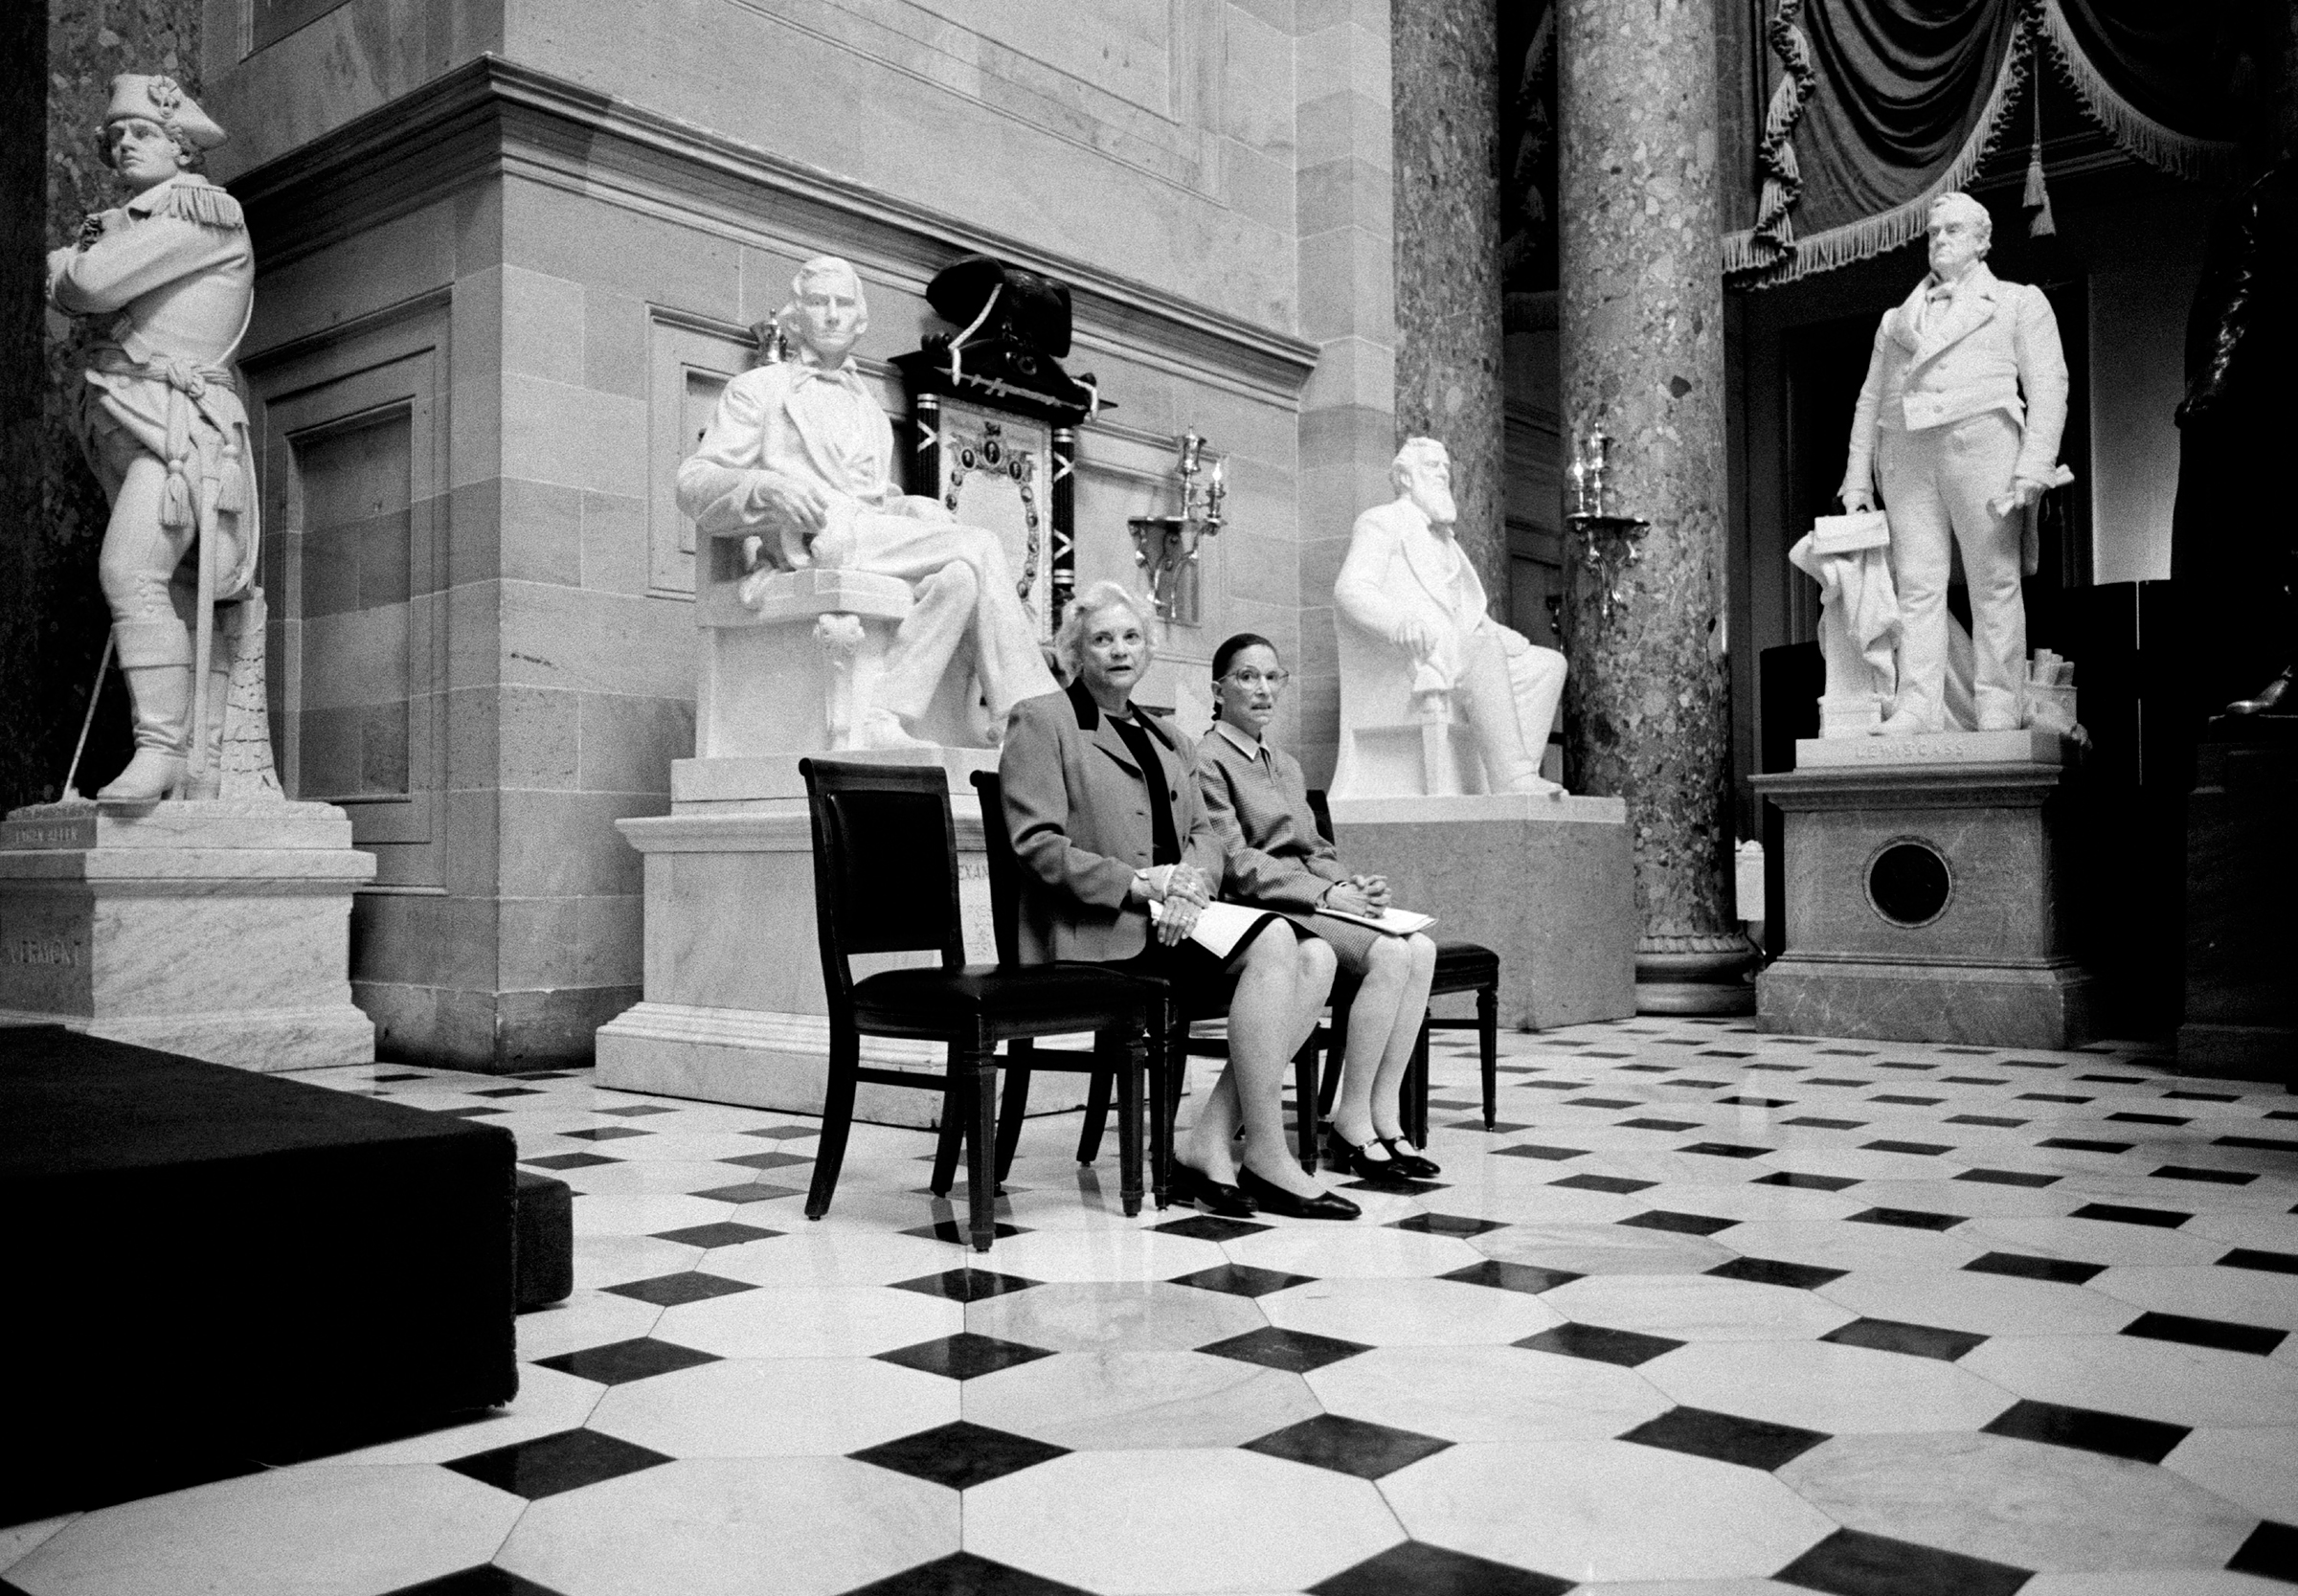 March 2001 The only two female Justices of the U.S. Supreme Court, Sandra Day O'Connor and Ruth Bader Ginsburg, pose for a portrait in Statuary Hall, surrounded by statues of men at the U.S. Capitol Building in Washington, D.C. The two Justices were preparing to address a meeting of the Congressional Women's Caucus. (David Hume Kennerly—Getty Images)